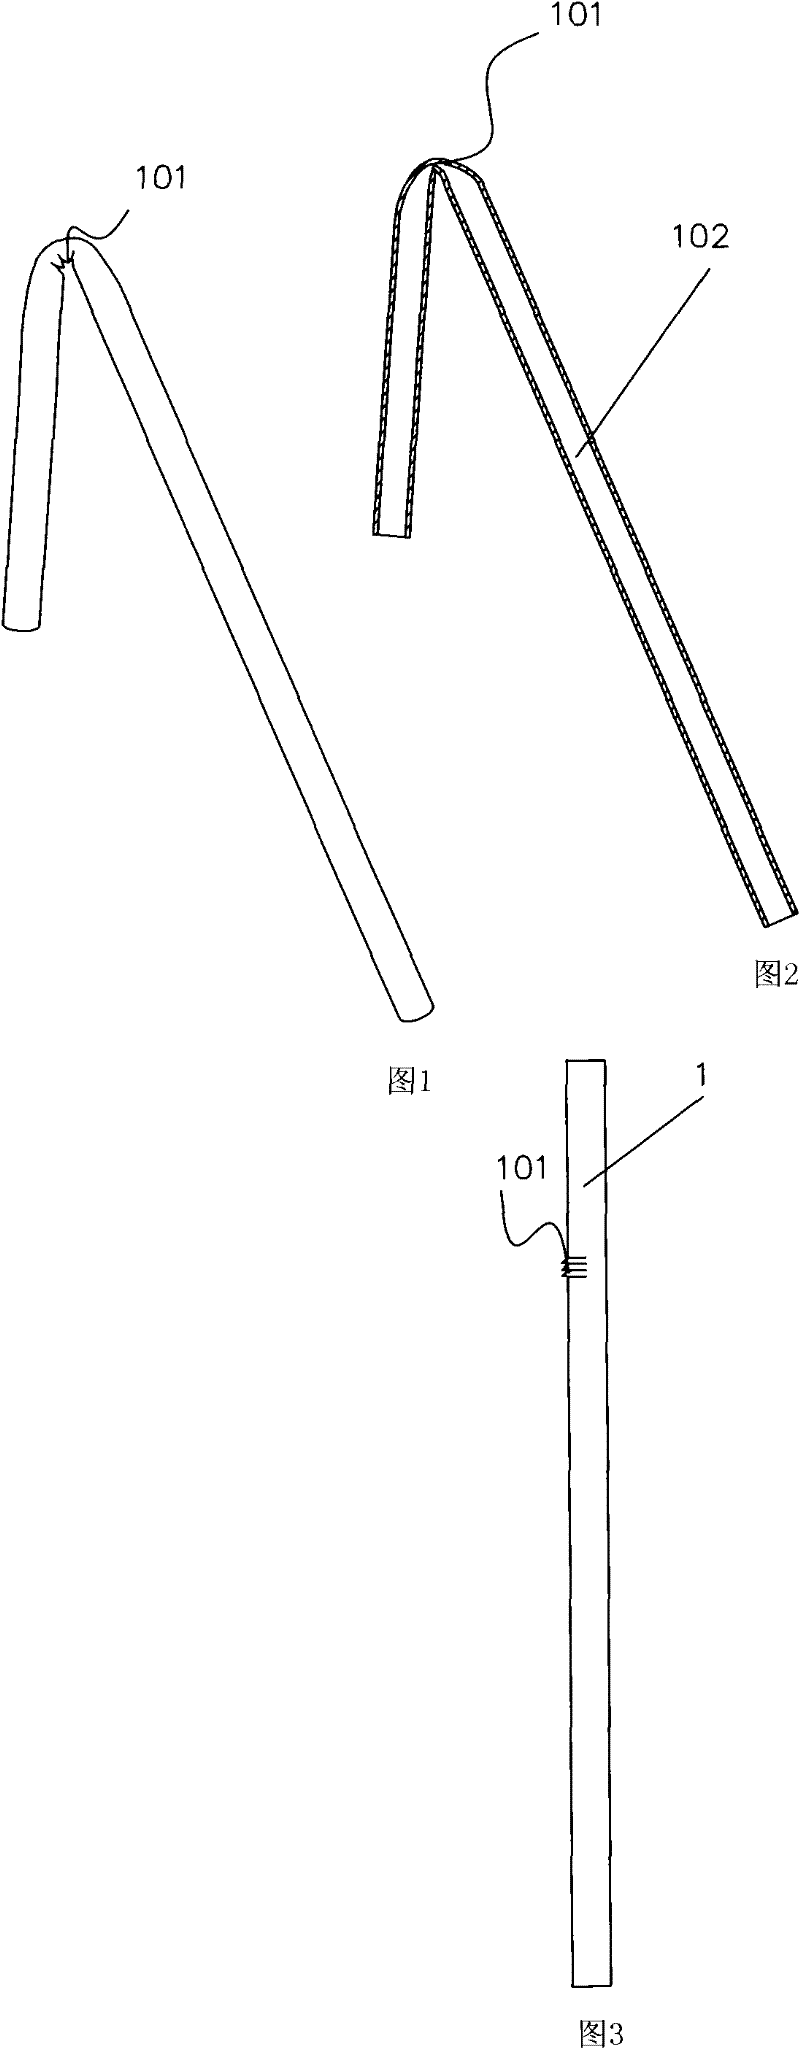 Suction tube capable of being automatically closed